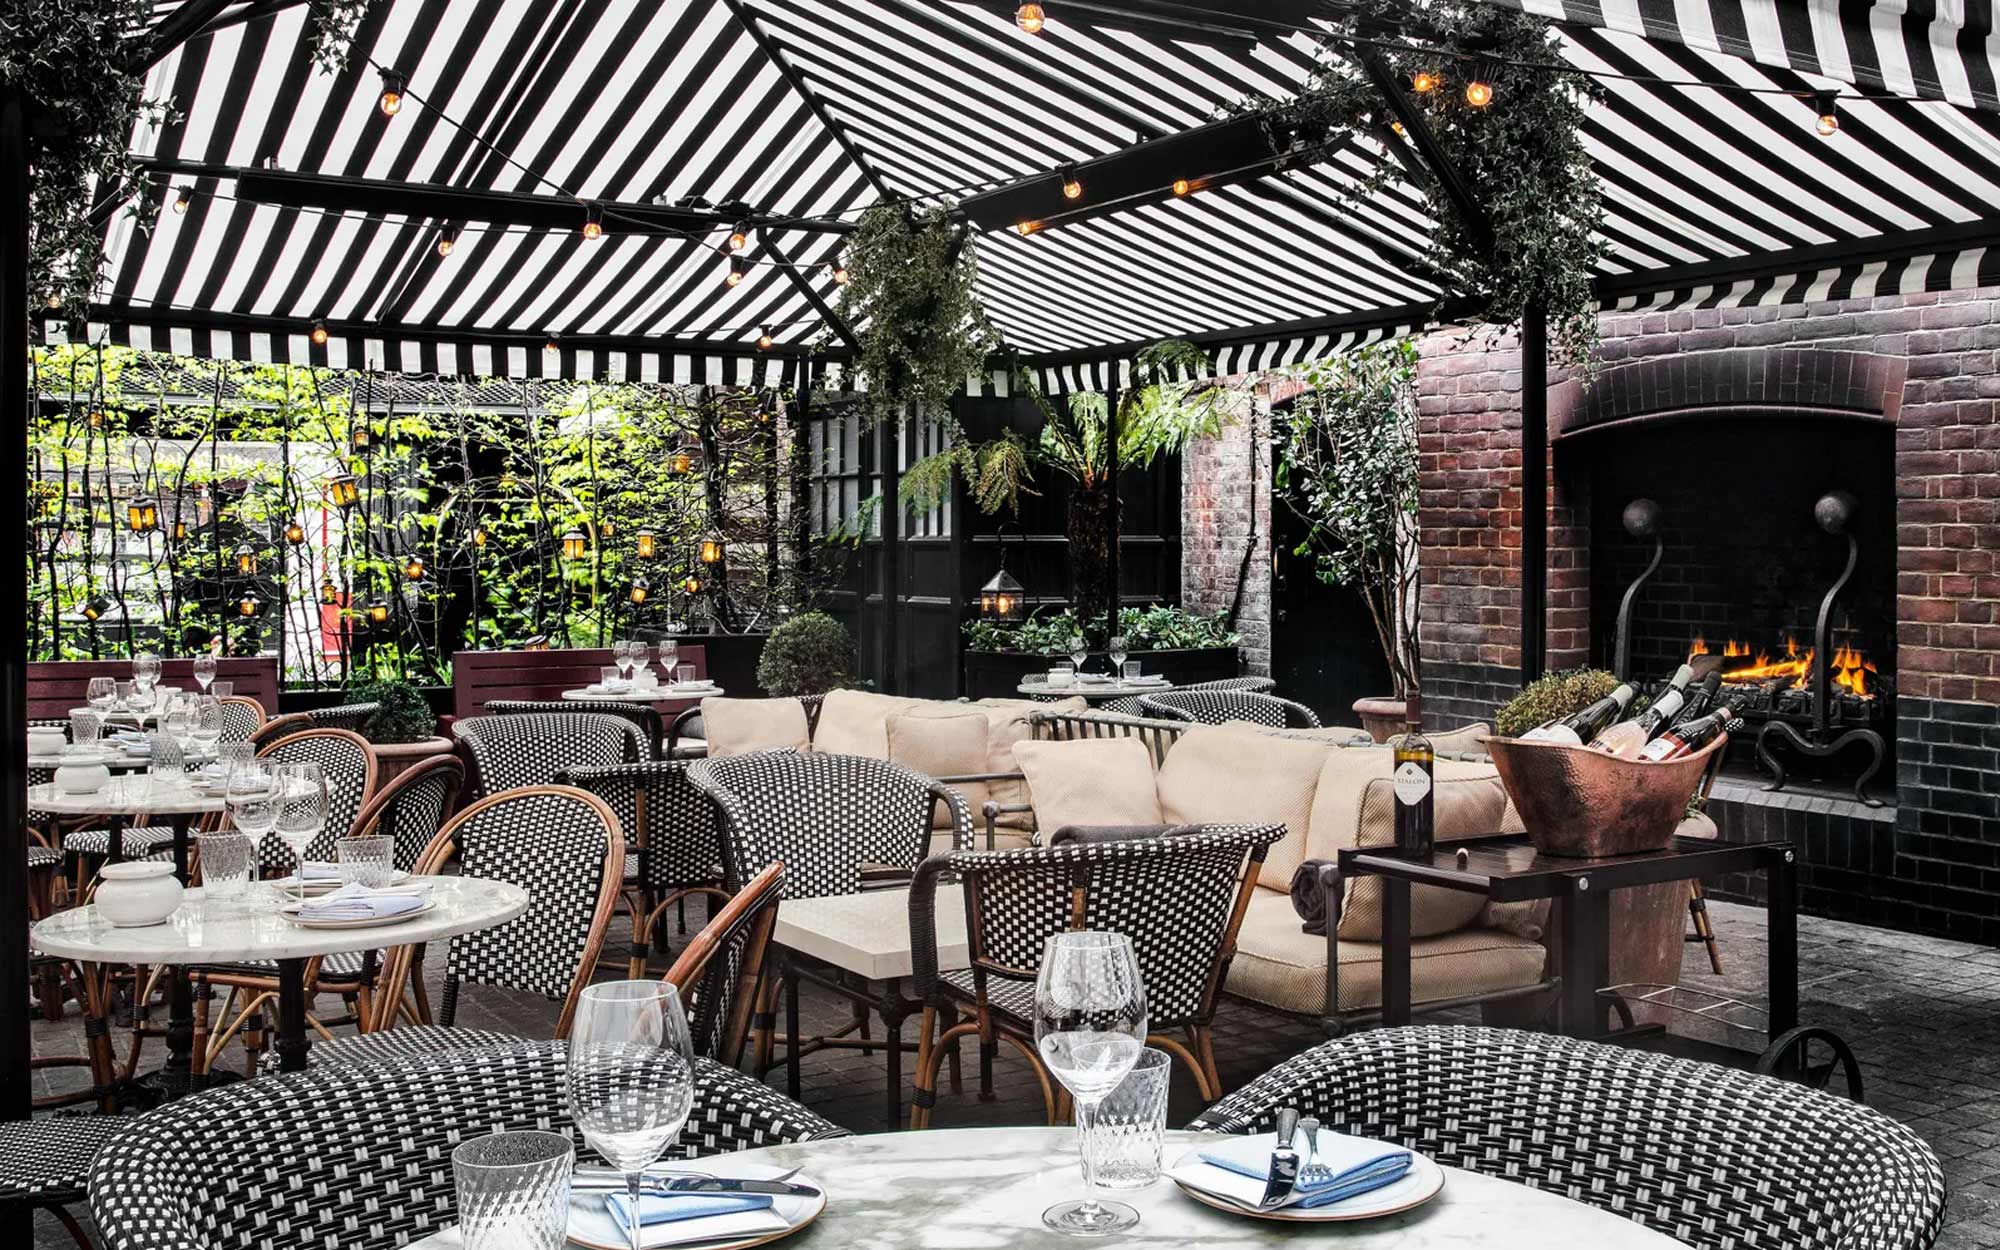  Terrace Awnings for Chiltern Firehouse in London 